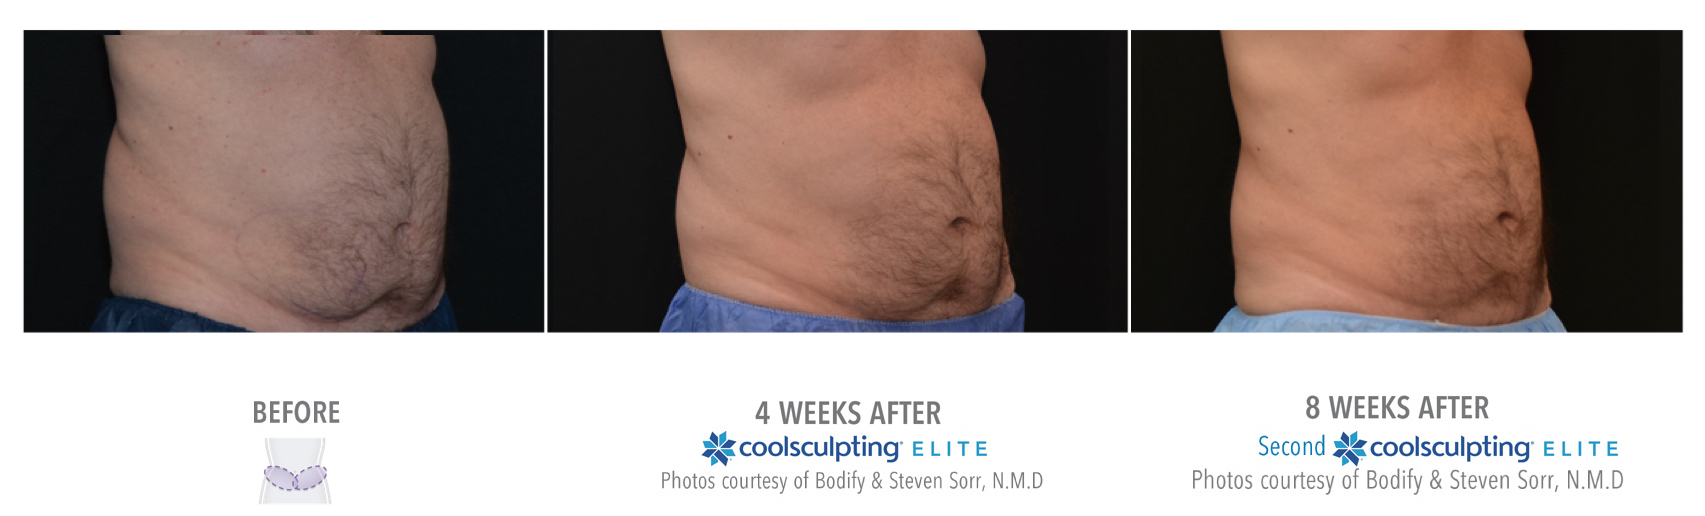 Coolsculpting Treatment results of a male | Melindas Medical Spa & Salon in North Myrtle Beach, SC